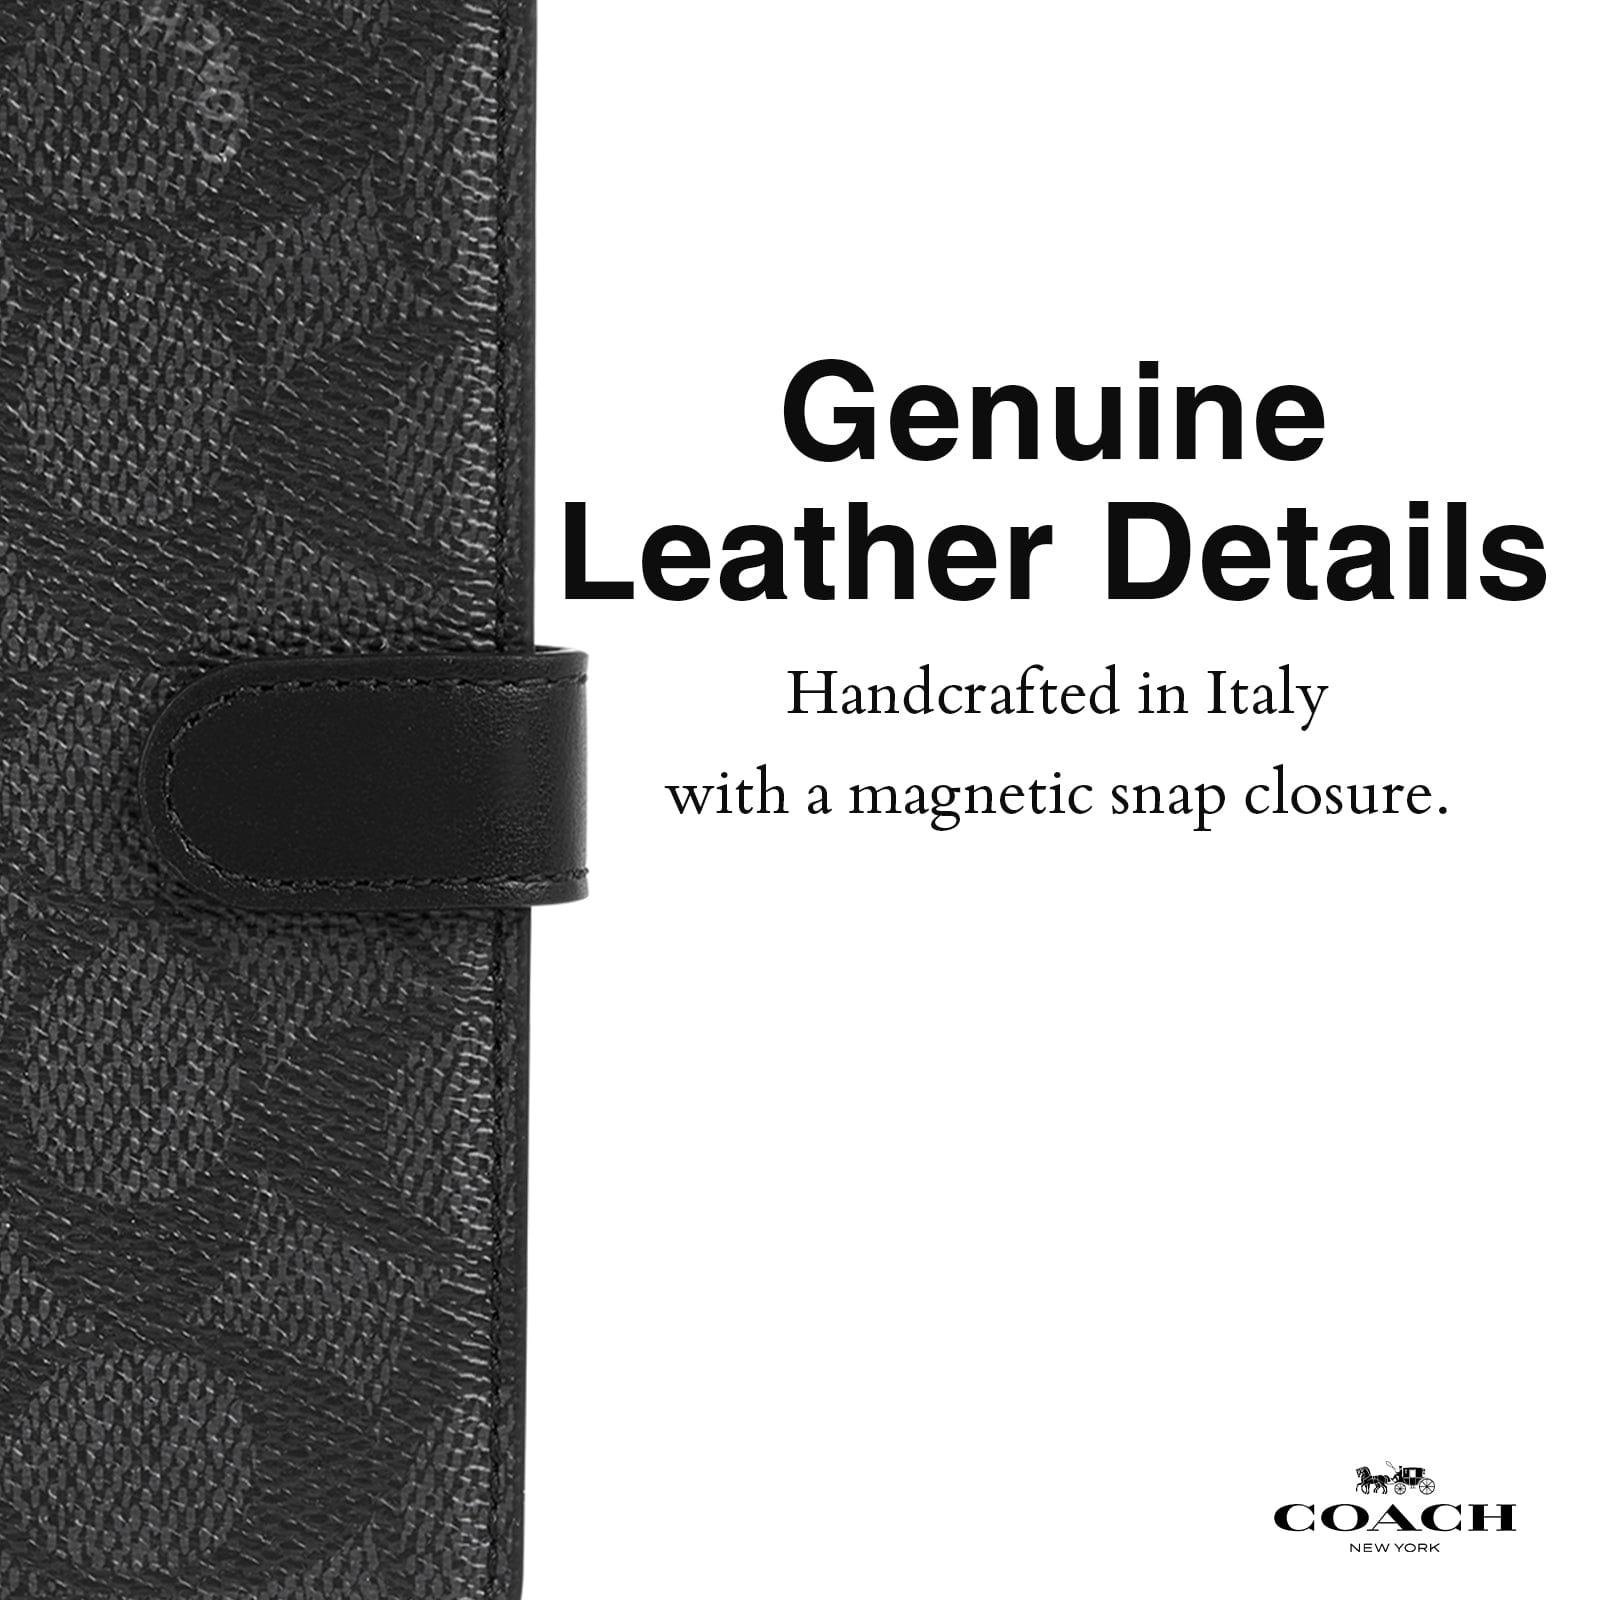 GENUINE LEATHER DETAILS. HANDCRAFTED IN ITALY WITH A MAGNETIC SNAP CLOSURE.